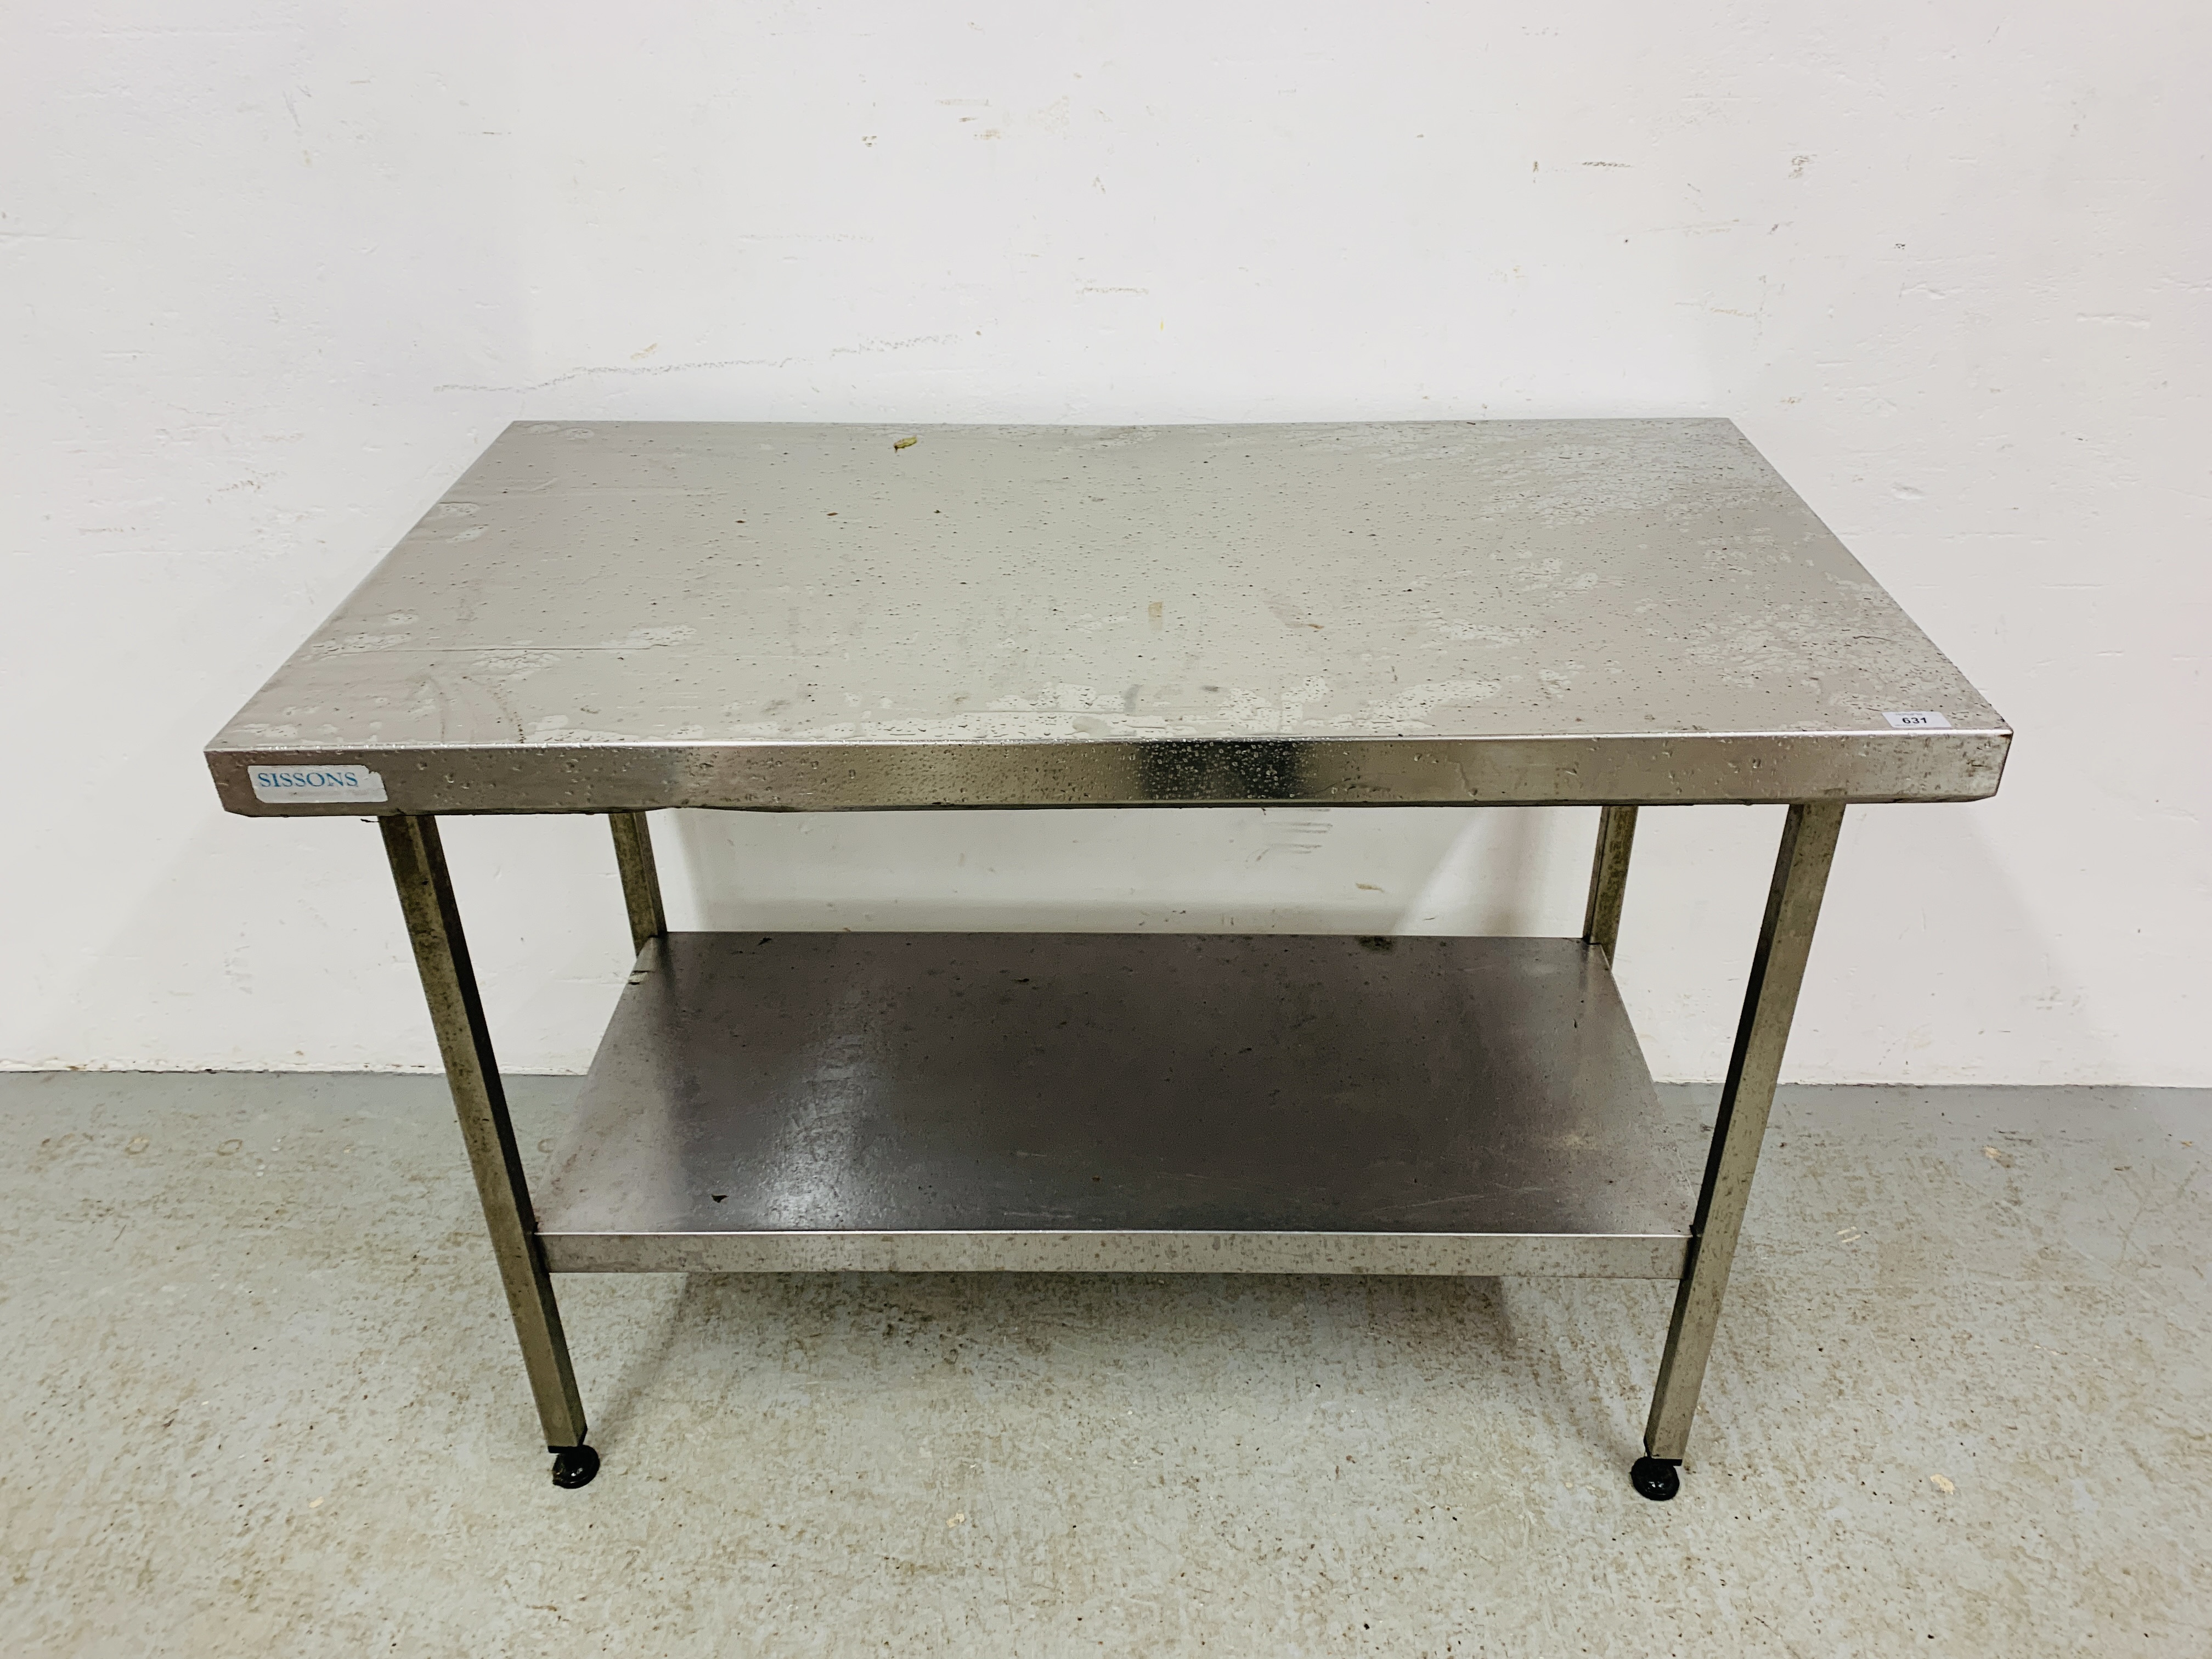 A SISSONS STAINLESS STEEEL 2 TIER PREPARATION TABLE W - 120CM X D - 65 CM.